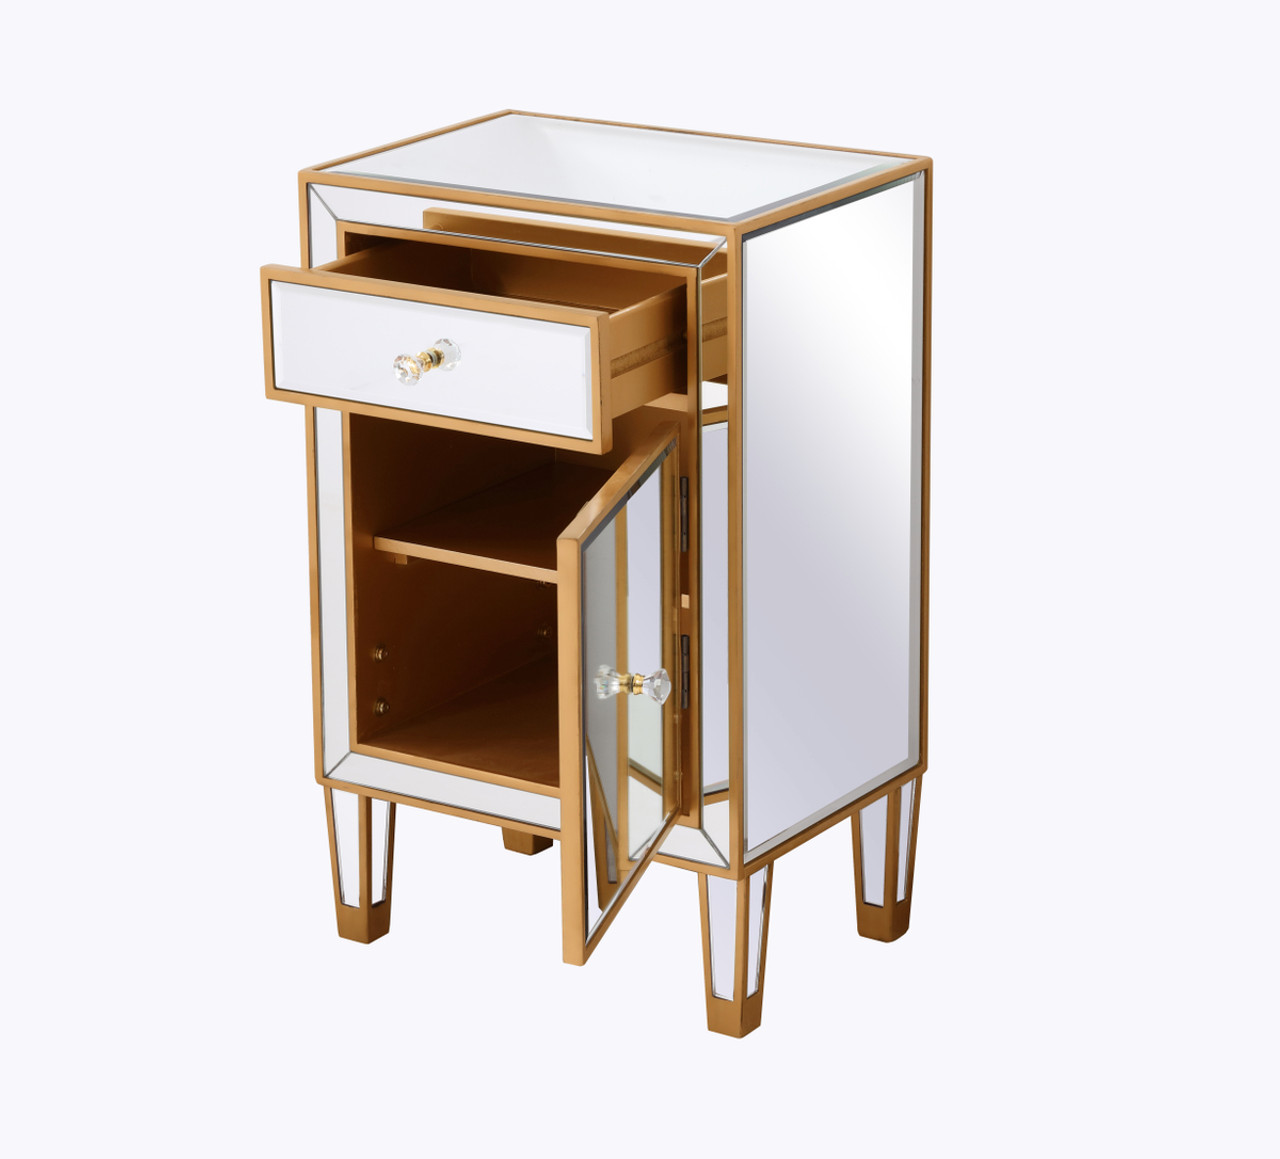 Elegant Decor MF72035G End table 1 drawer 18in. W x 13in. D x 29in. H in gold